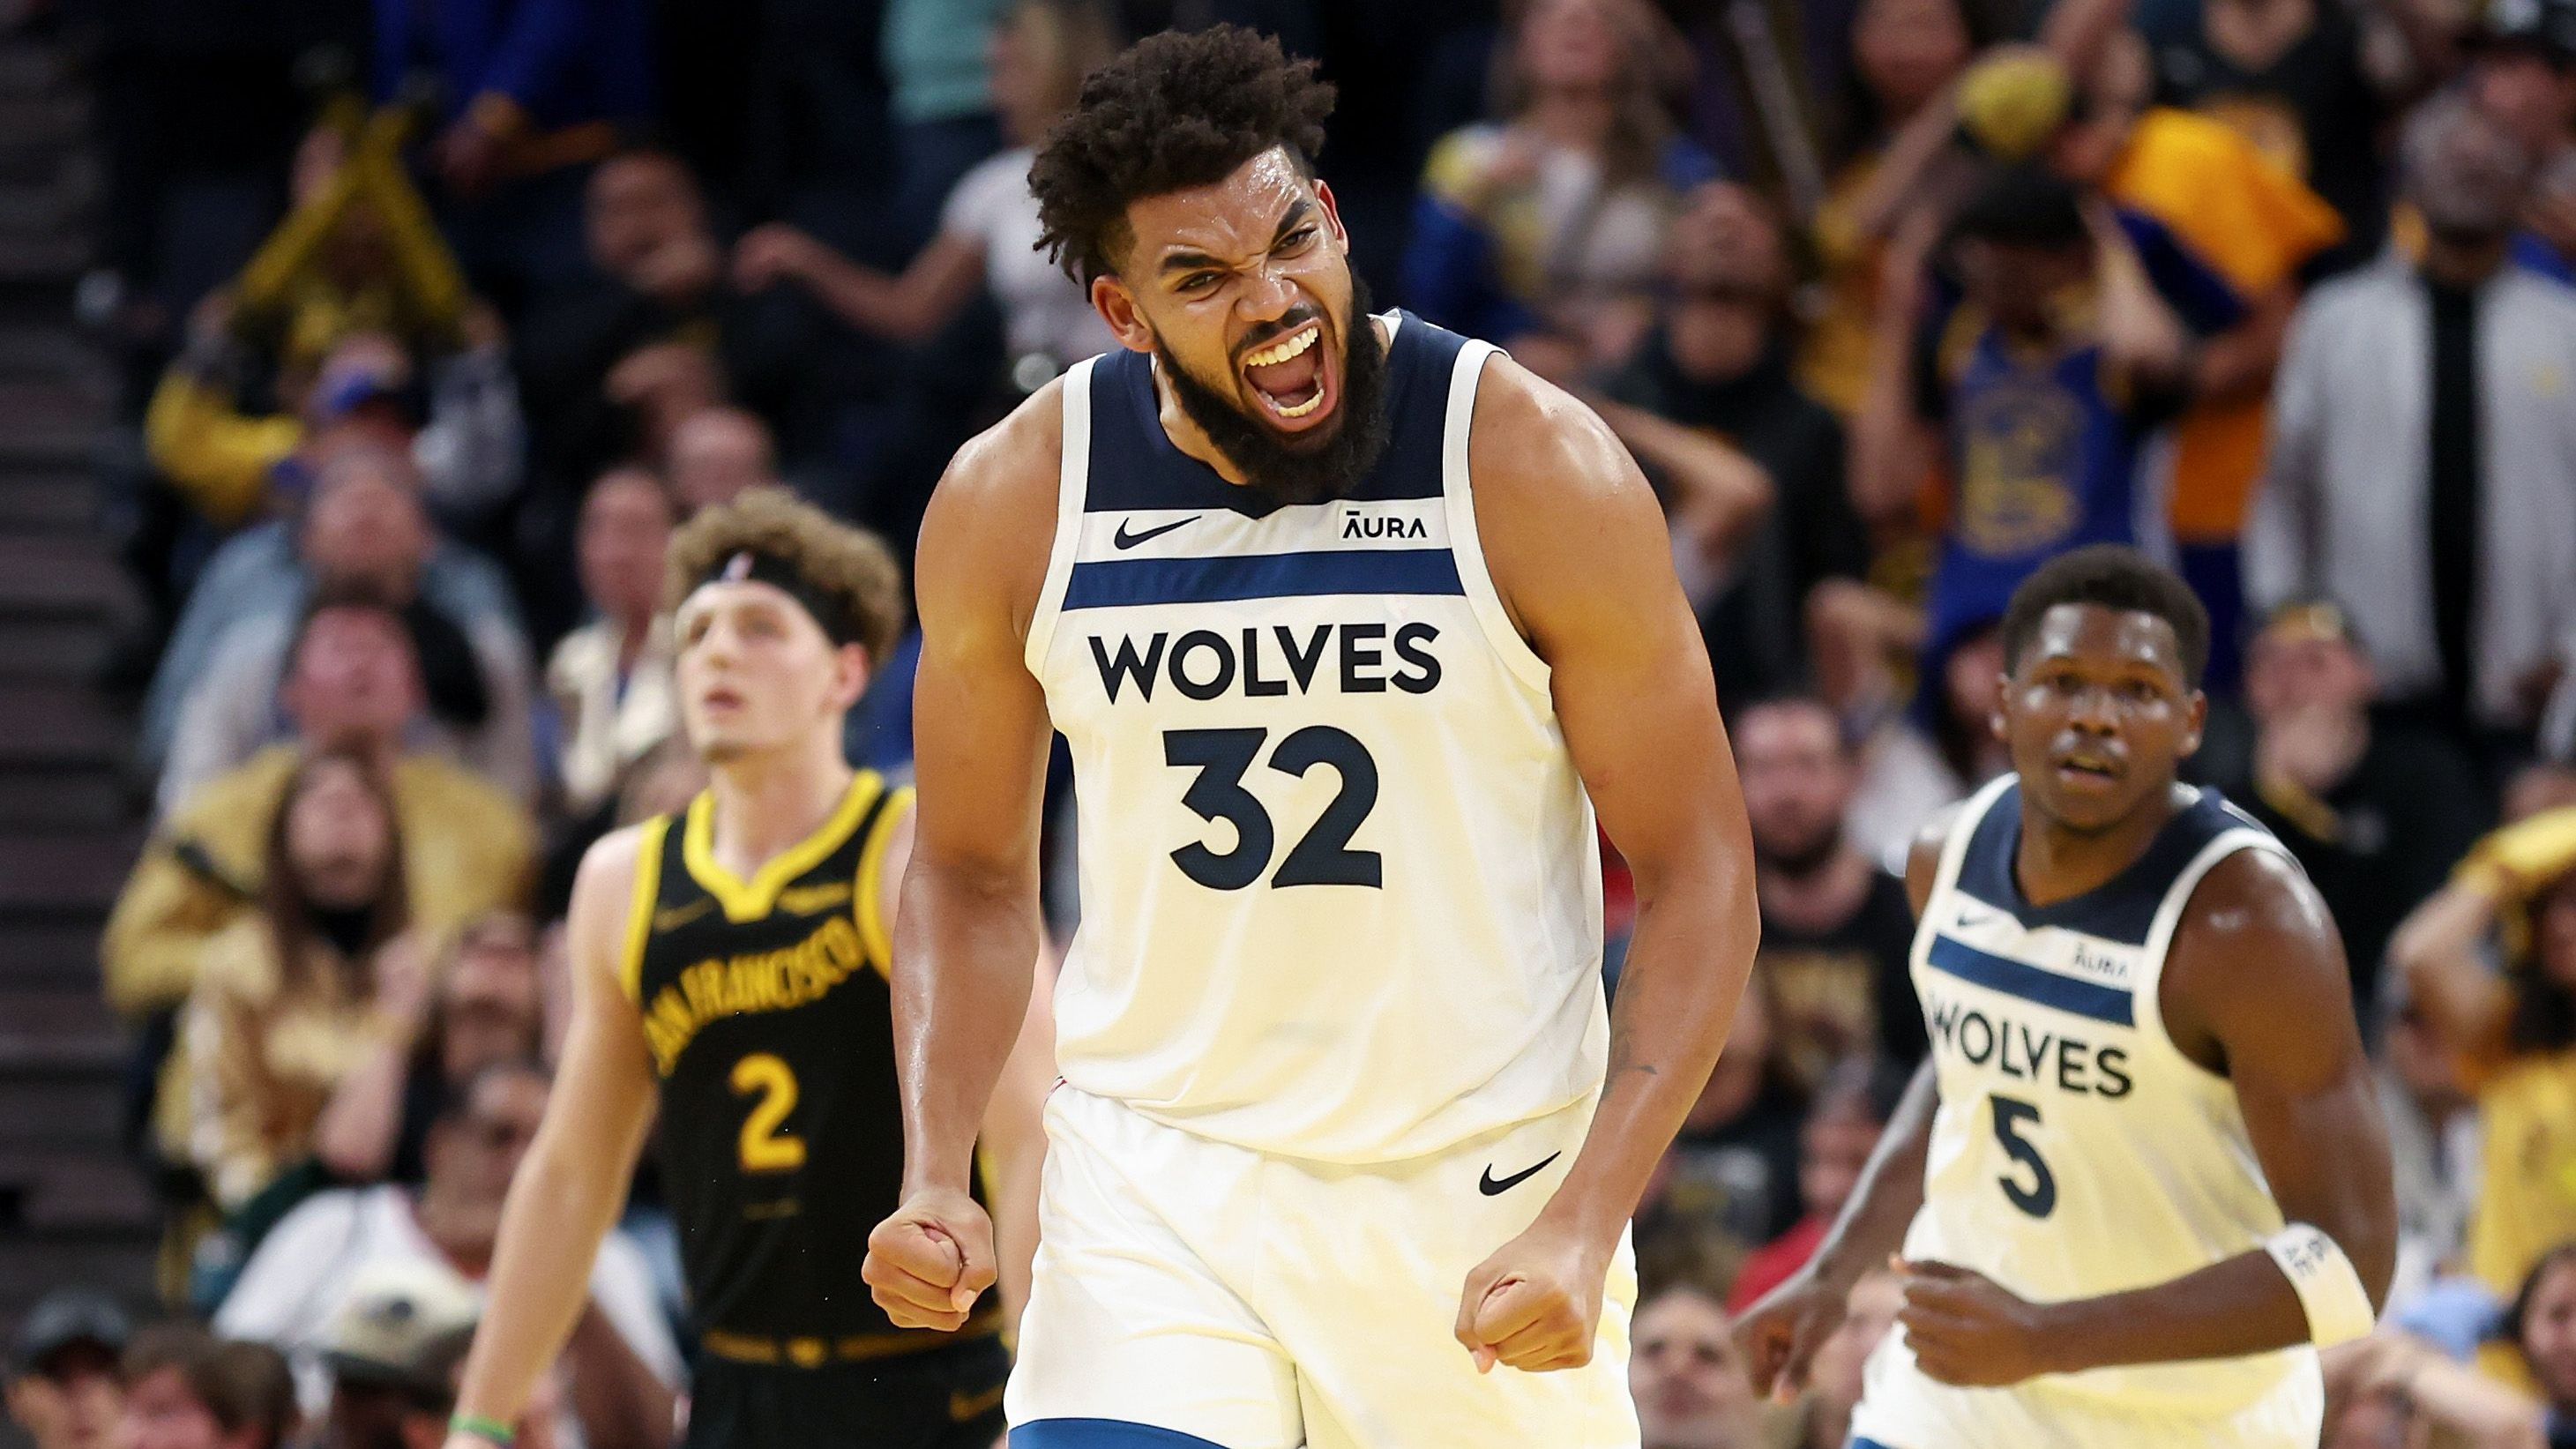 <strong>Karl-Anthony Towns (Western Conference)</strong><br>Position: Center<br>Team: Minnesota Timberwolves<br>Stats pro Spiel 2023/2024: 22,5 Punkte, 8,7 Rebounds, 3,0 Assists<br>All-Star-Teilnahmen: 4